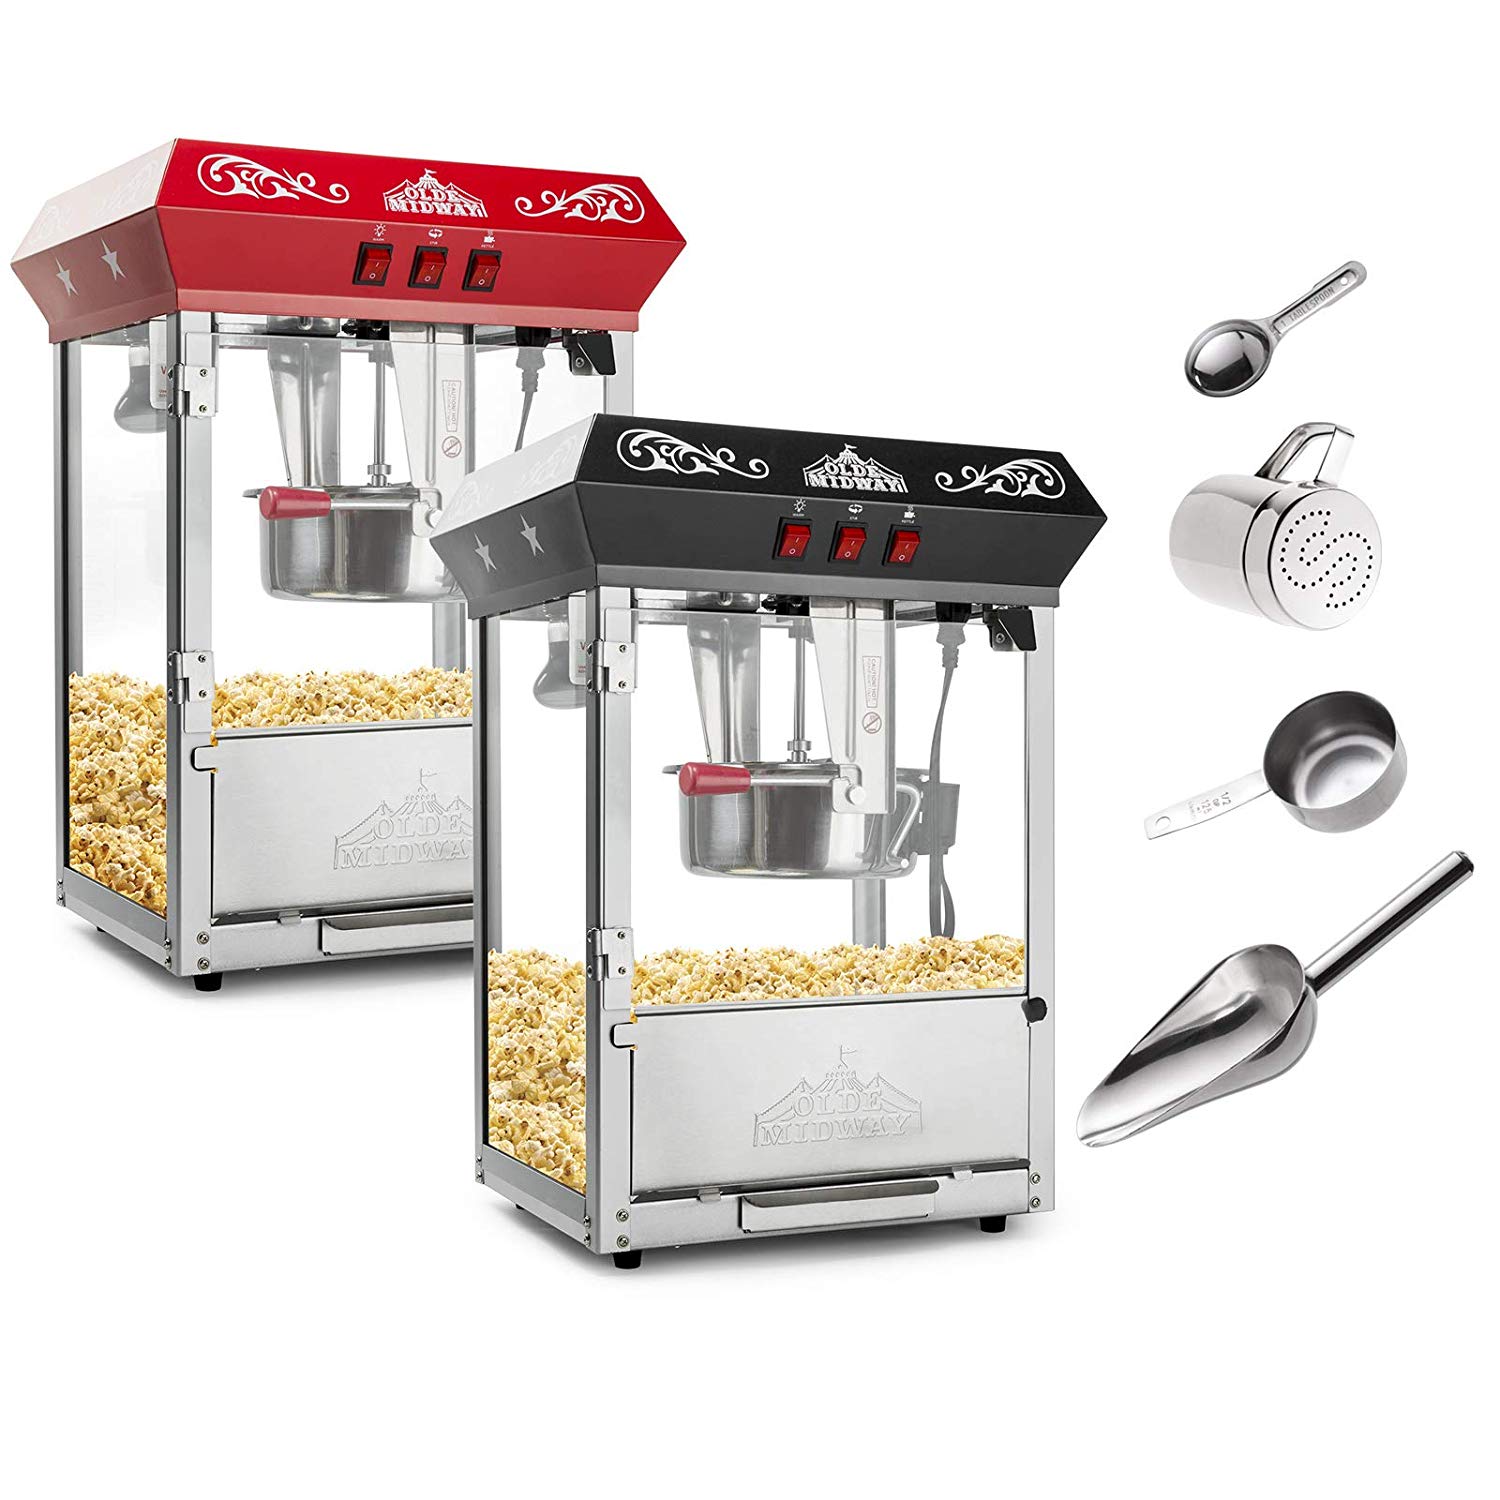 Olde Midway Bar Style Popcorn Machine Maker Popper with 8-Ounce Kettle - Black